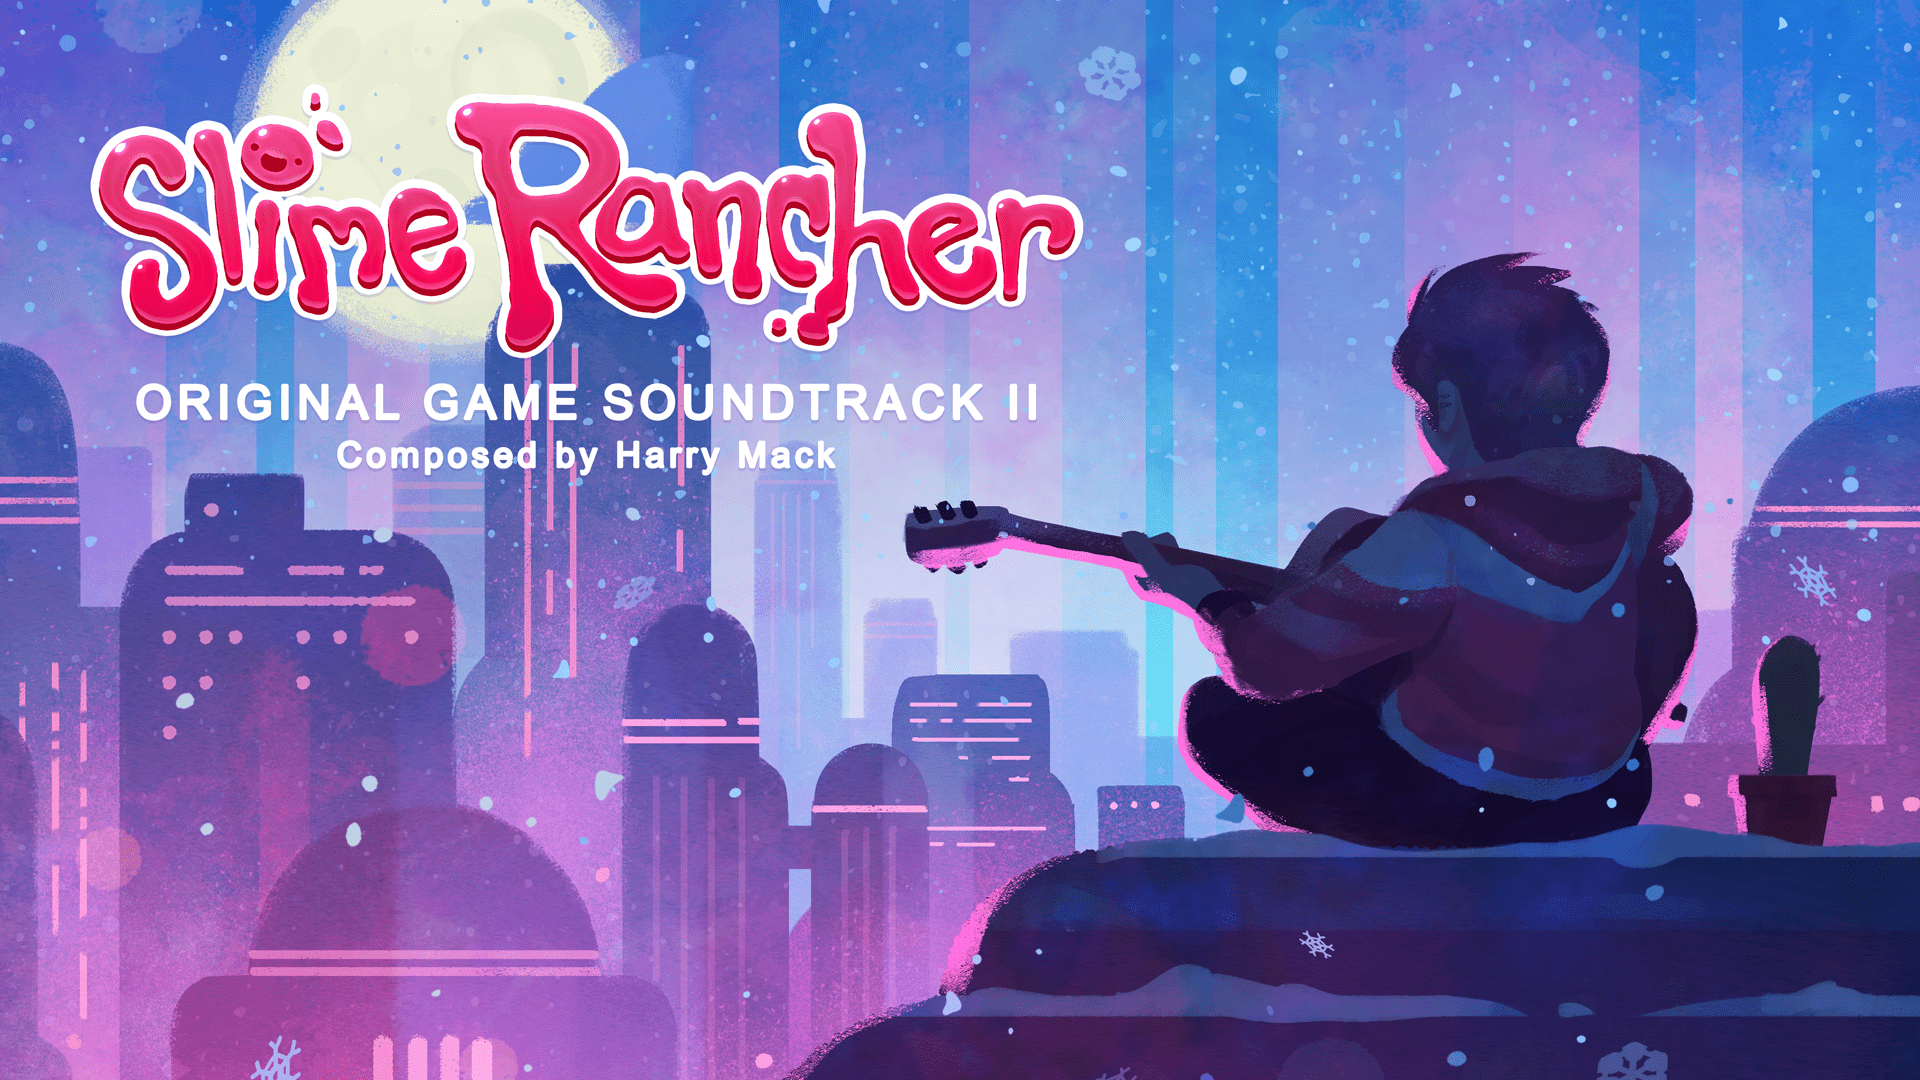 Steam - Slime Rancher - The Original Soundtrack II is Now Available!